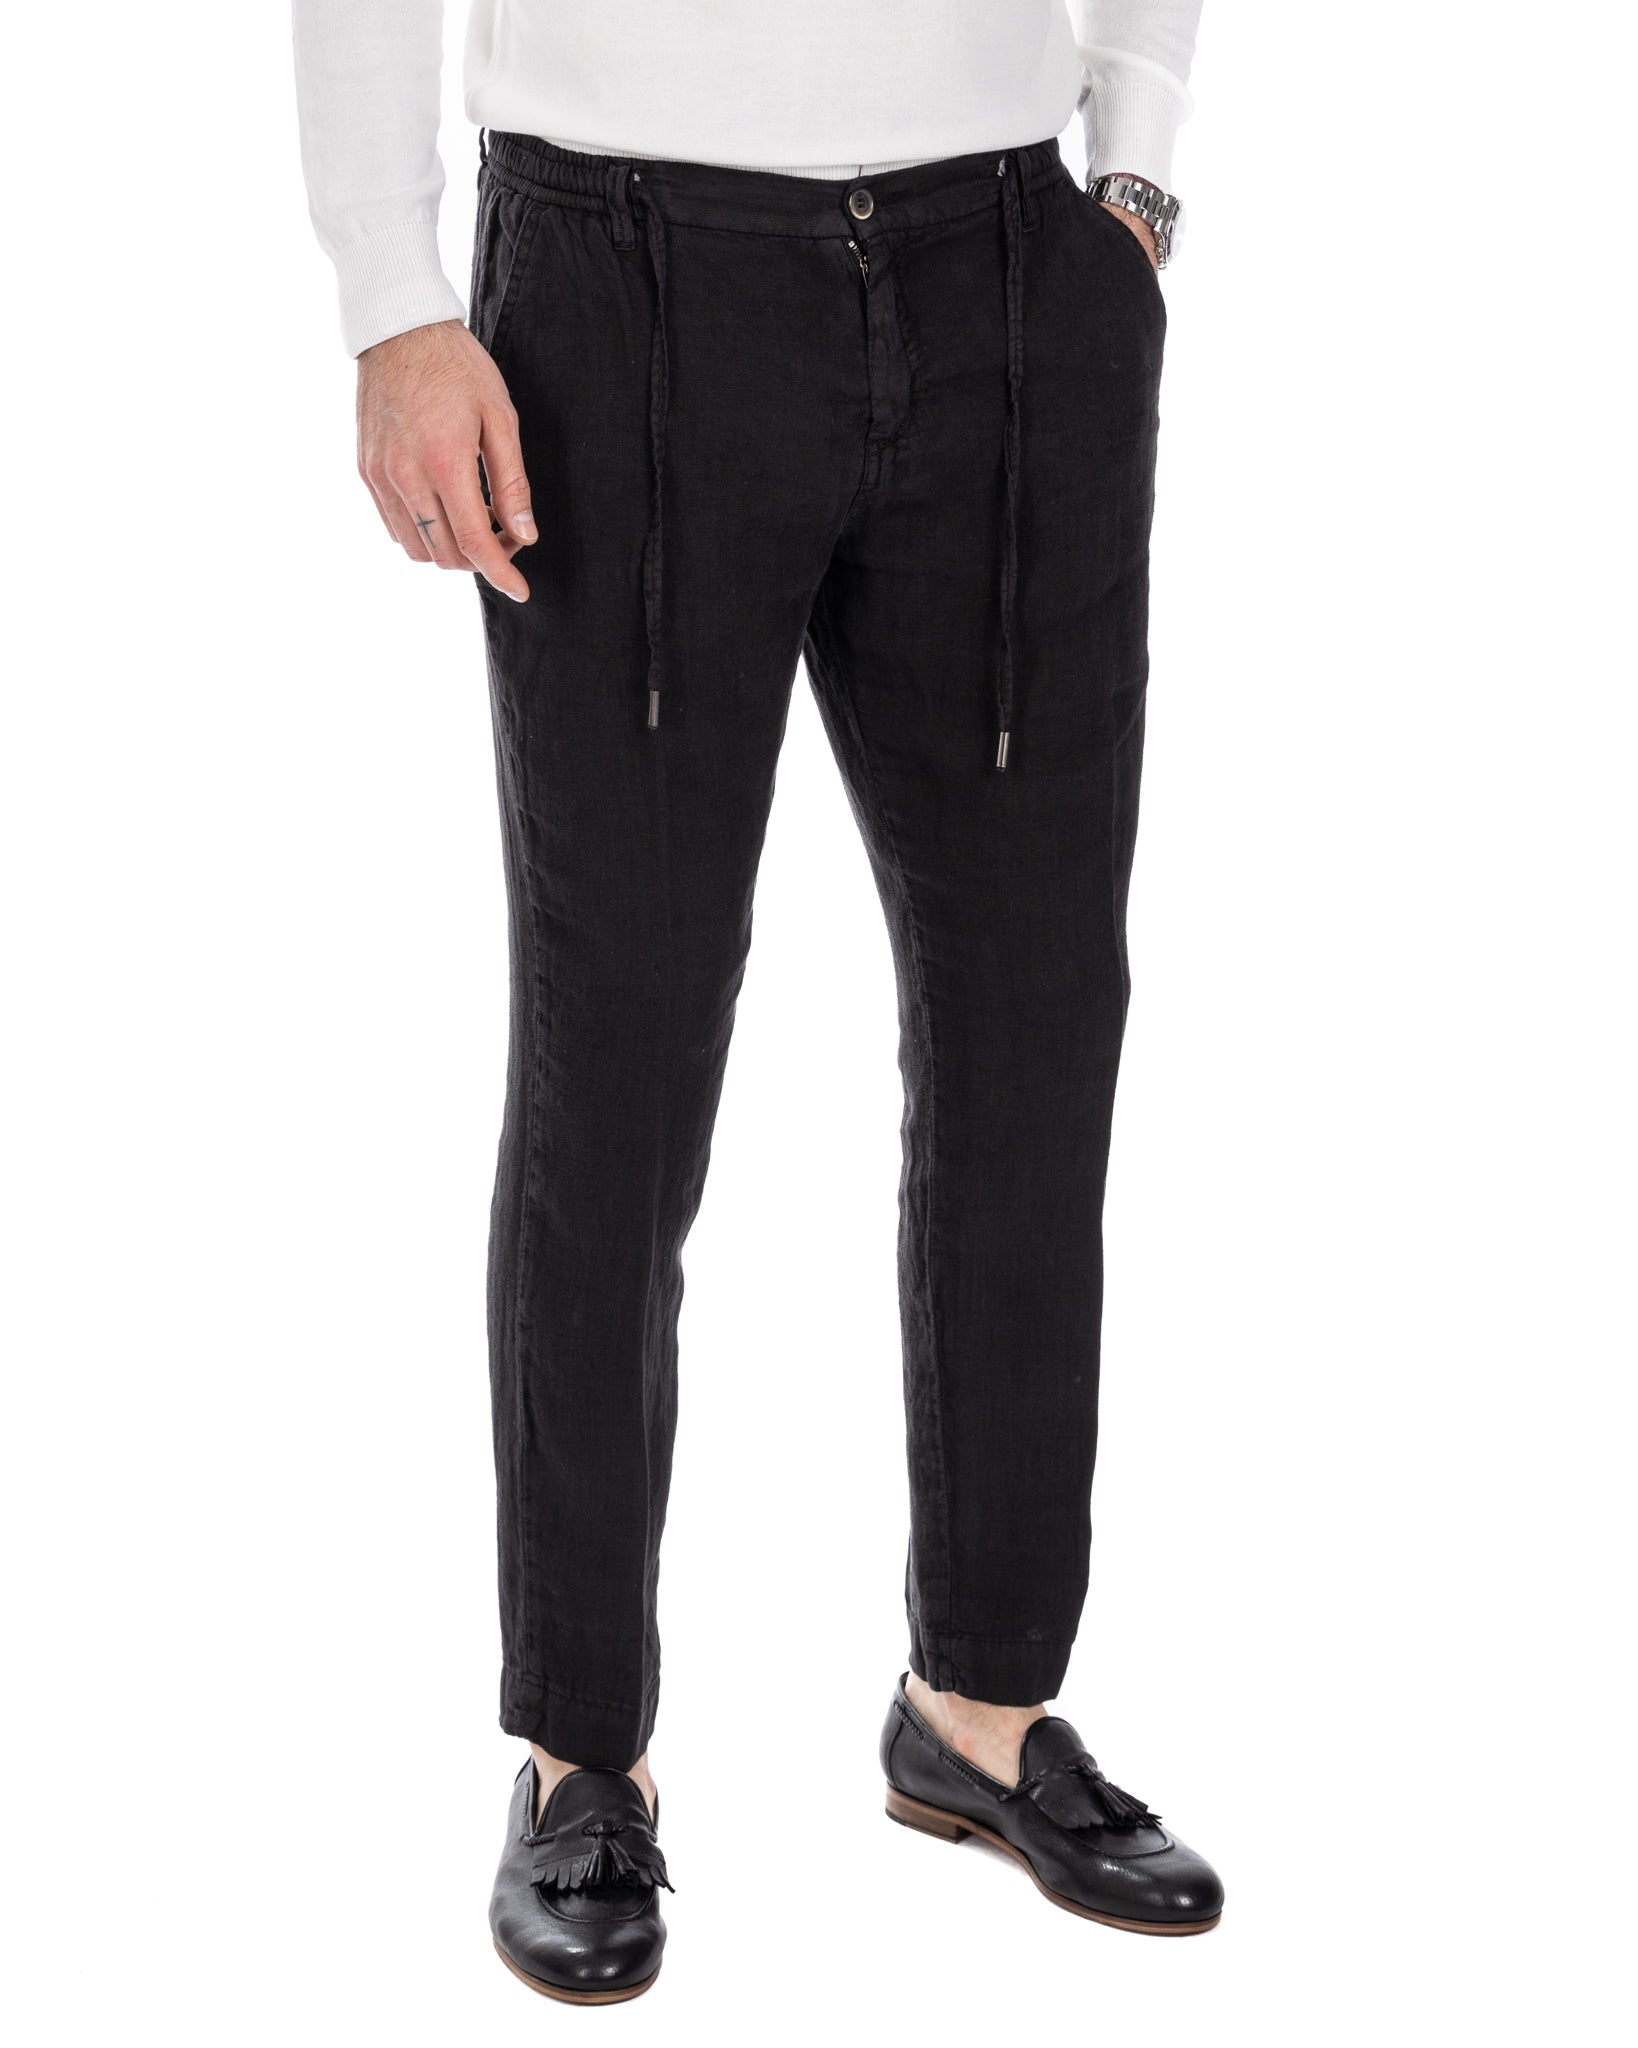 Gustave - trousers in pure black linen